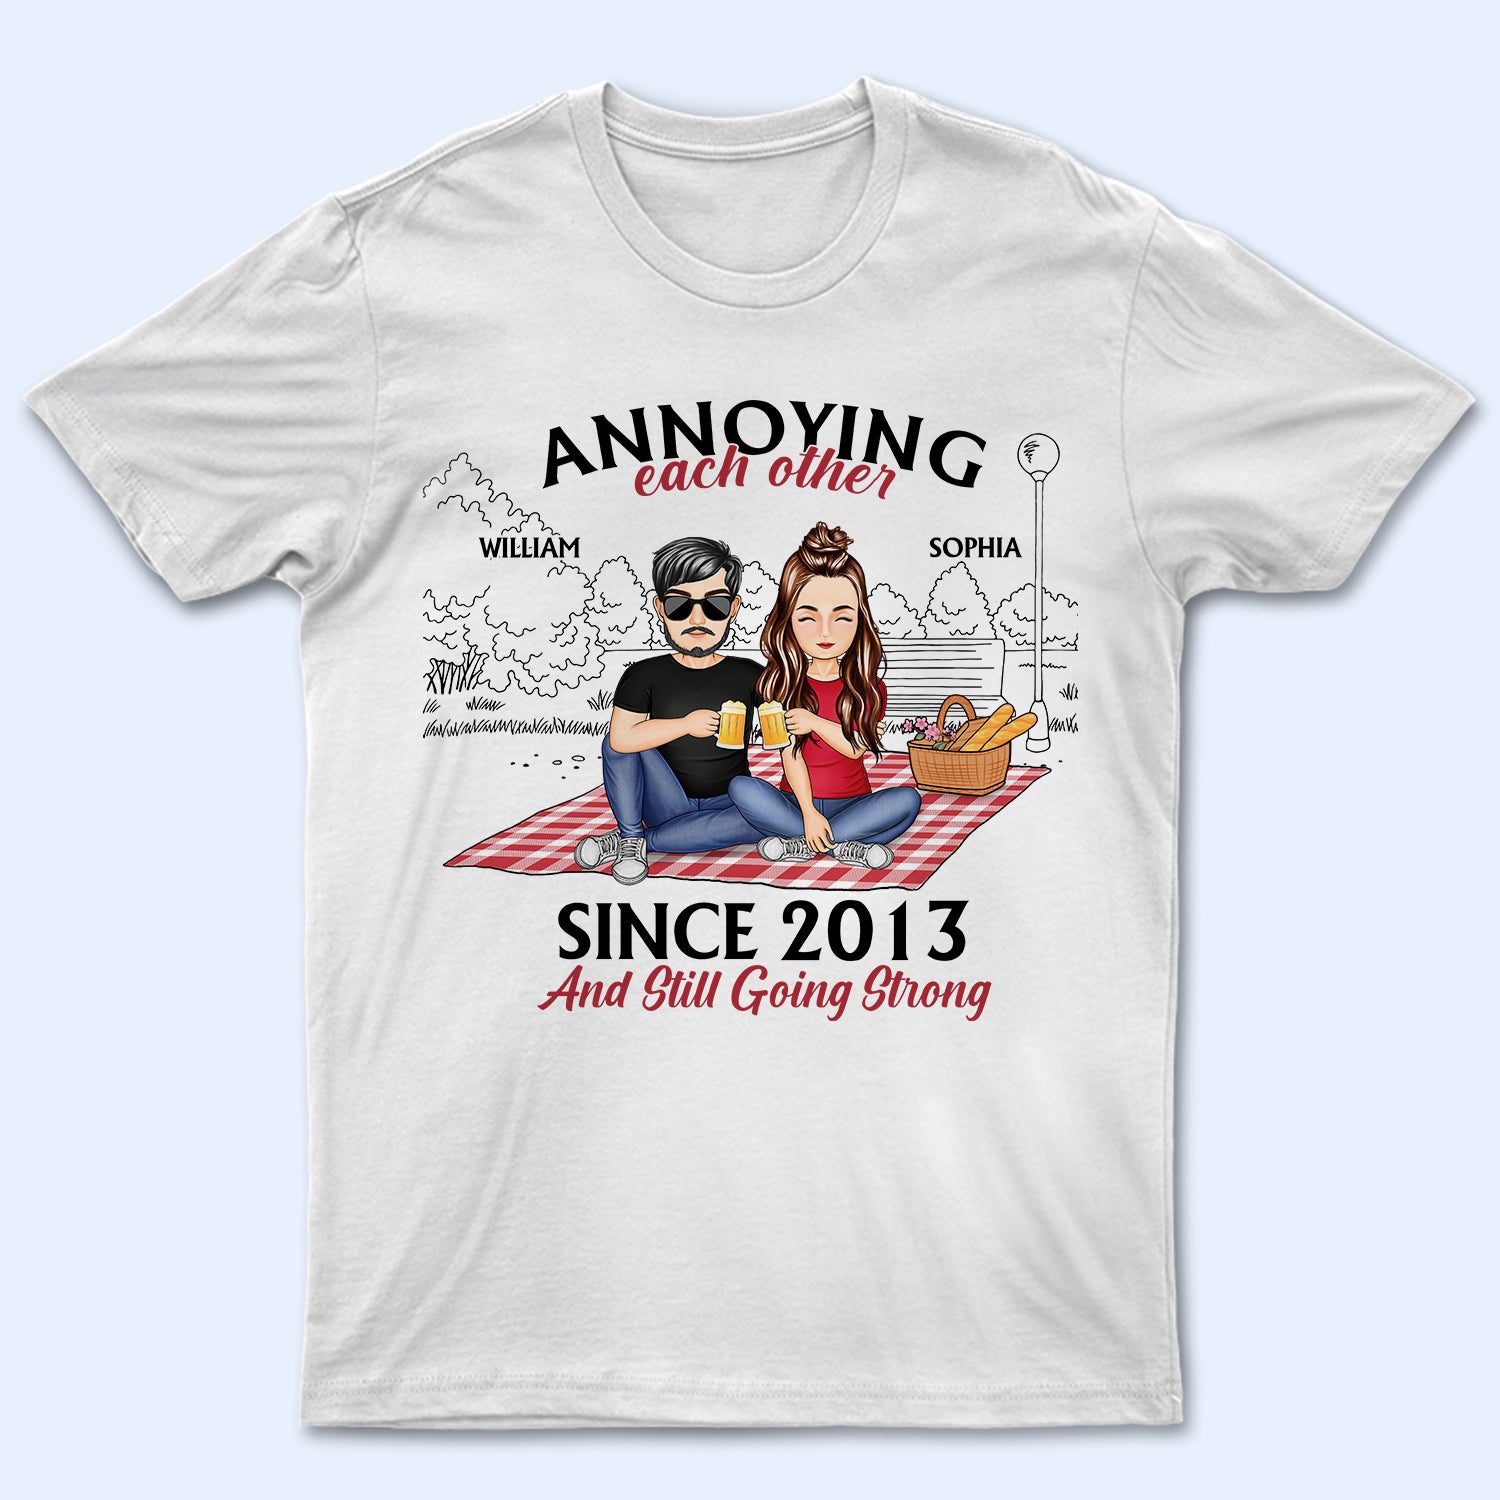 Annoying Each Other Still Going Strong Cartoon - Birthday, Anniversary, Loving Gift For Couple, Husband, Wife, Parents - Personalized T Shirt